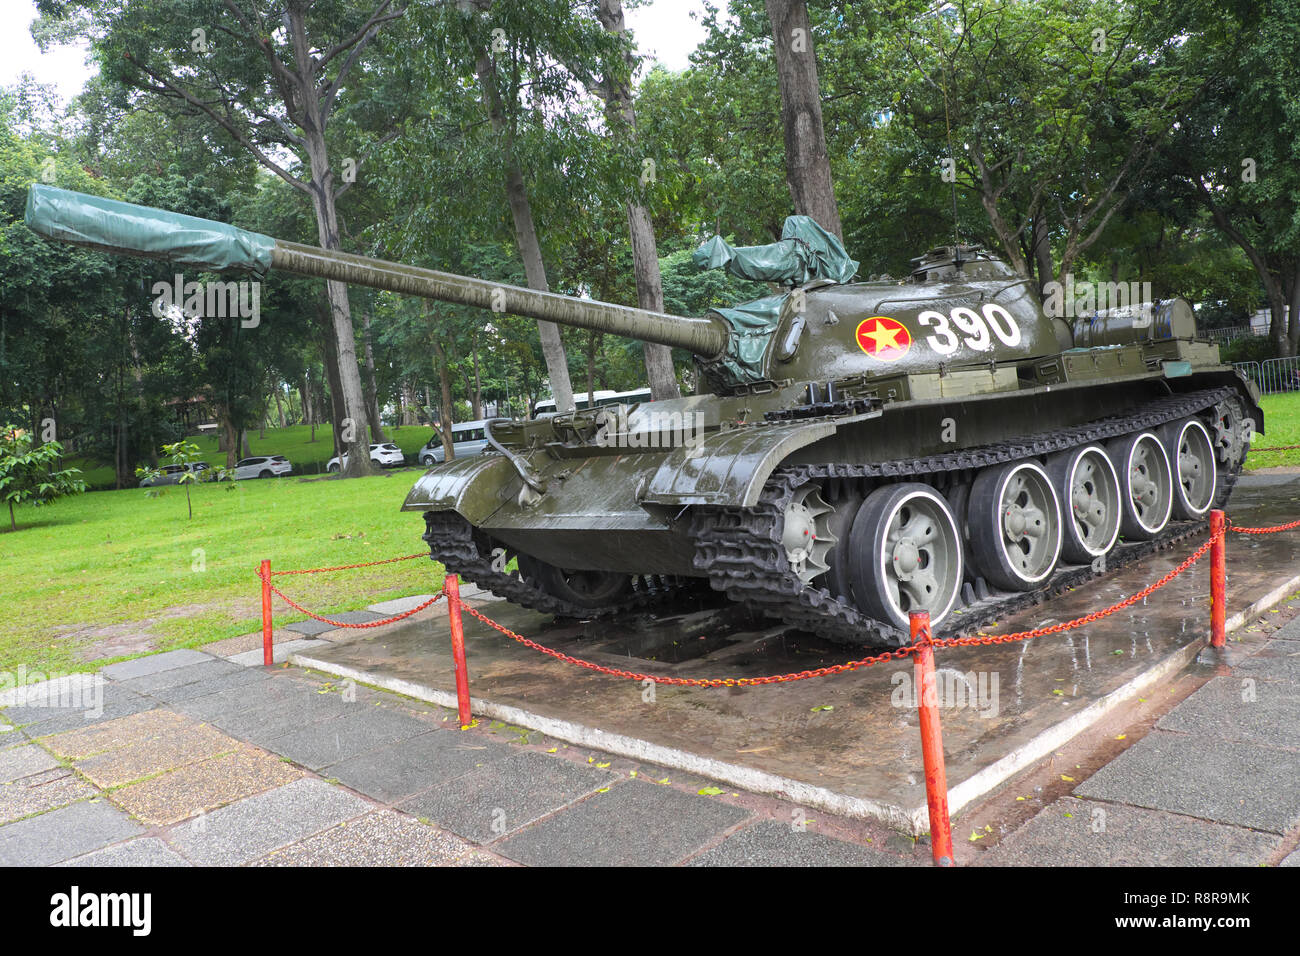 Ho Chi Minh City, Vietnam - A North Vietnamese T-54 battle tank displayed outside the Reunification Palace previously known as the Independence Palace Stock Photo